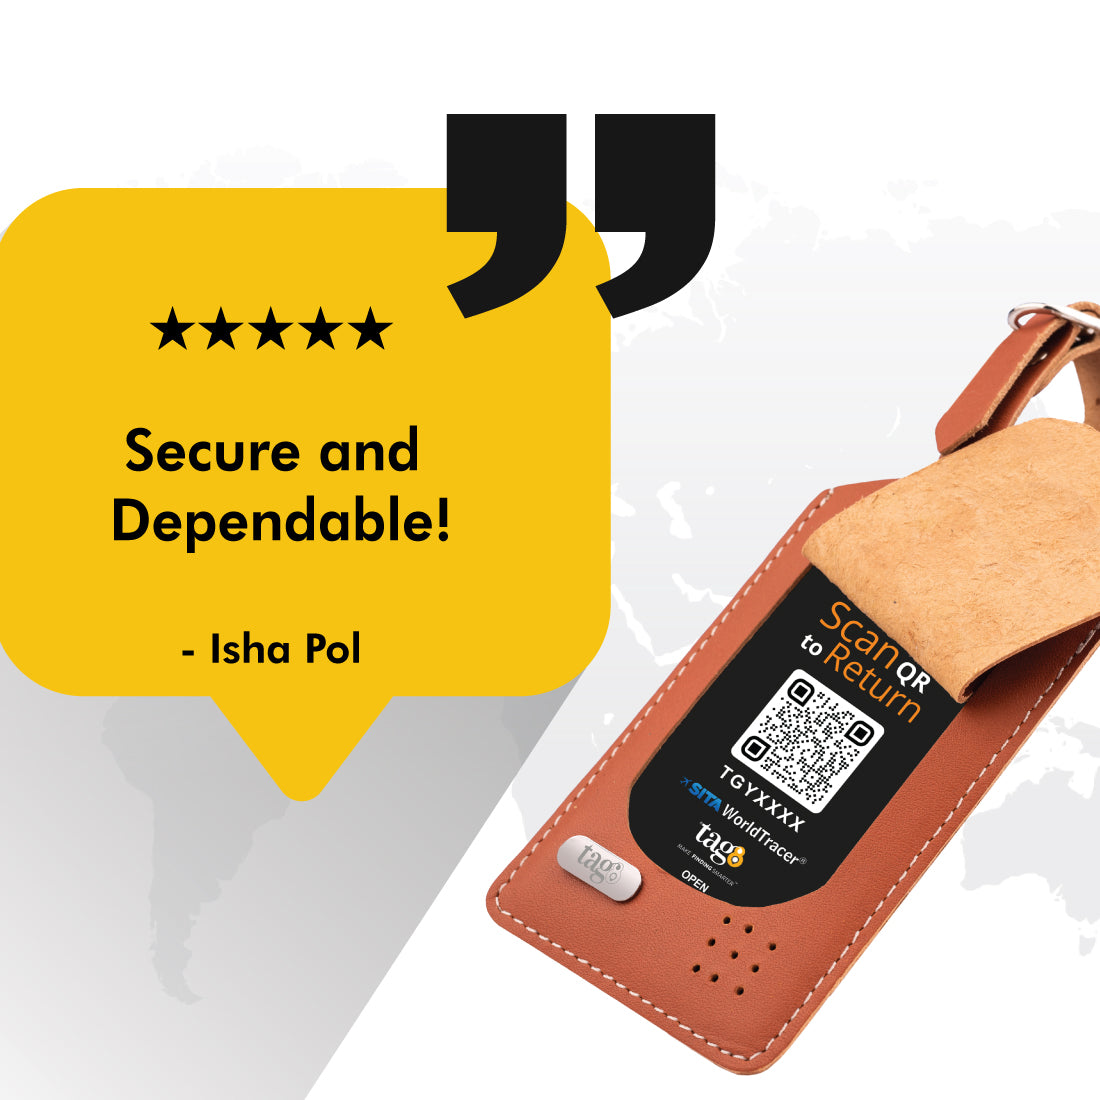 tag8-dolphin-smart-bag-tracker-review-secure-and-dependable